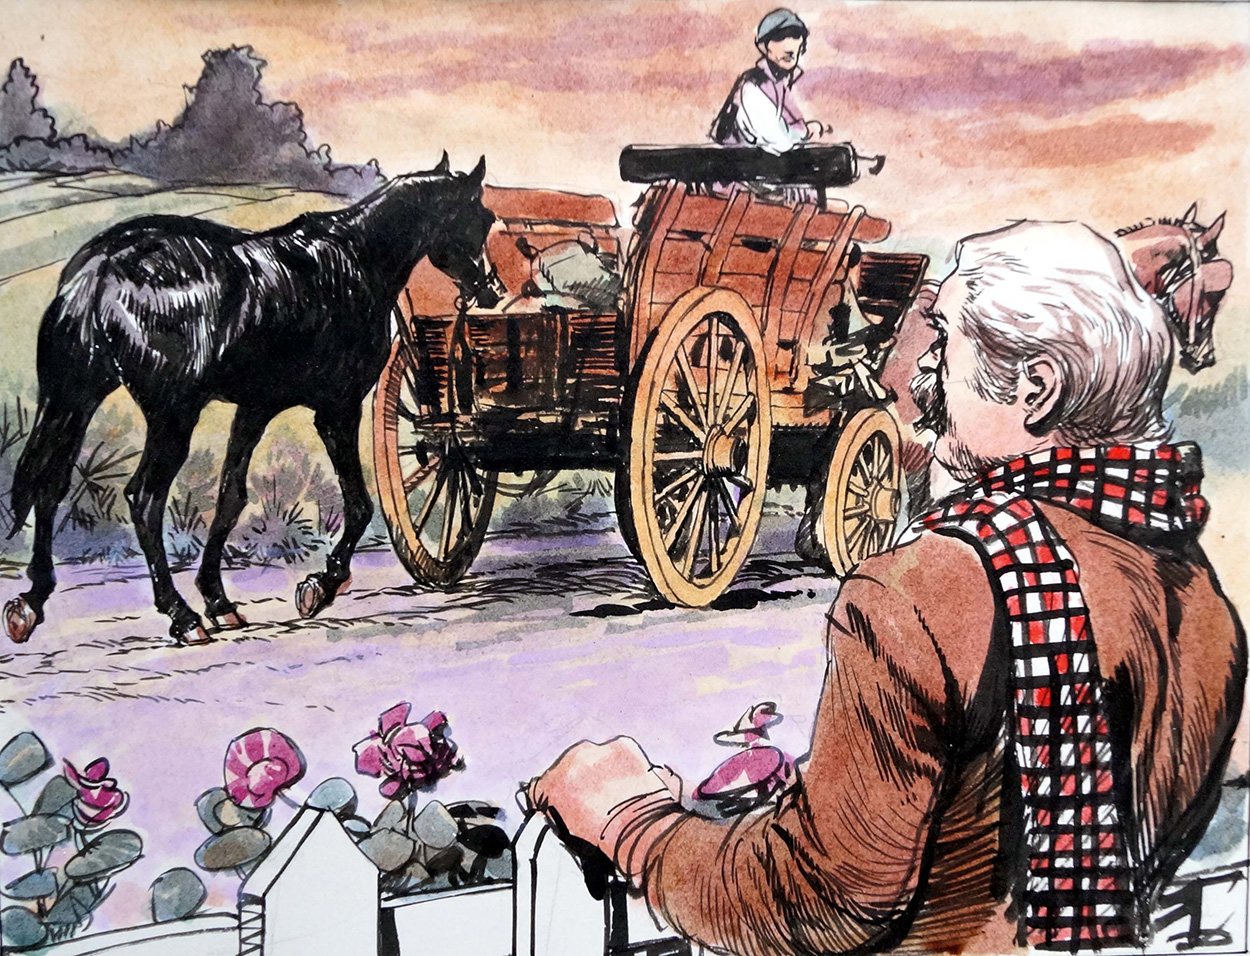 Black Beauty - A Passer-By (Original) art by Black Beauty (Carlos Roume) Art at The Illustration Art Gallery